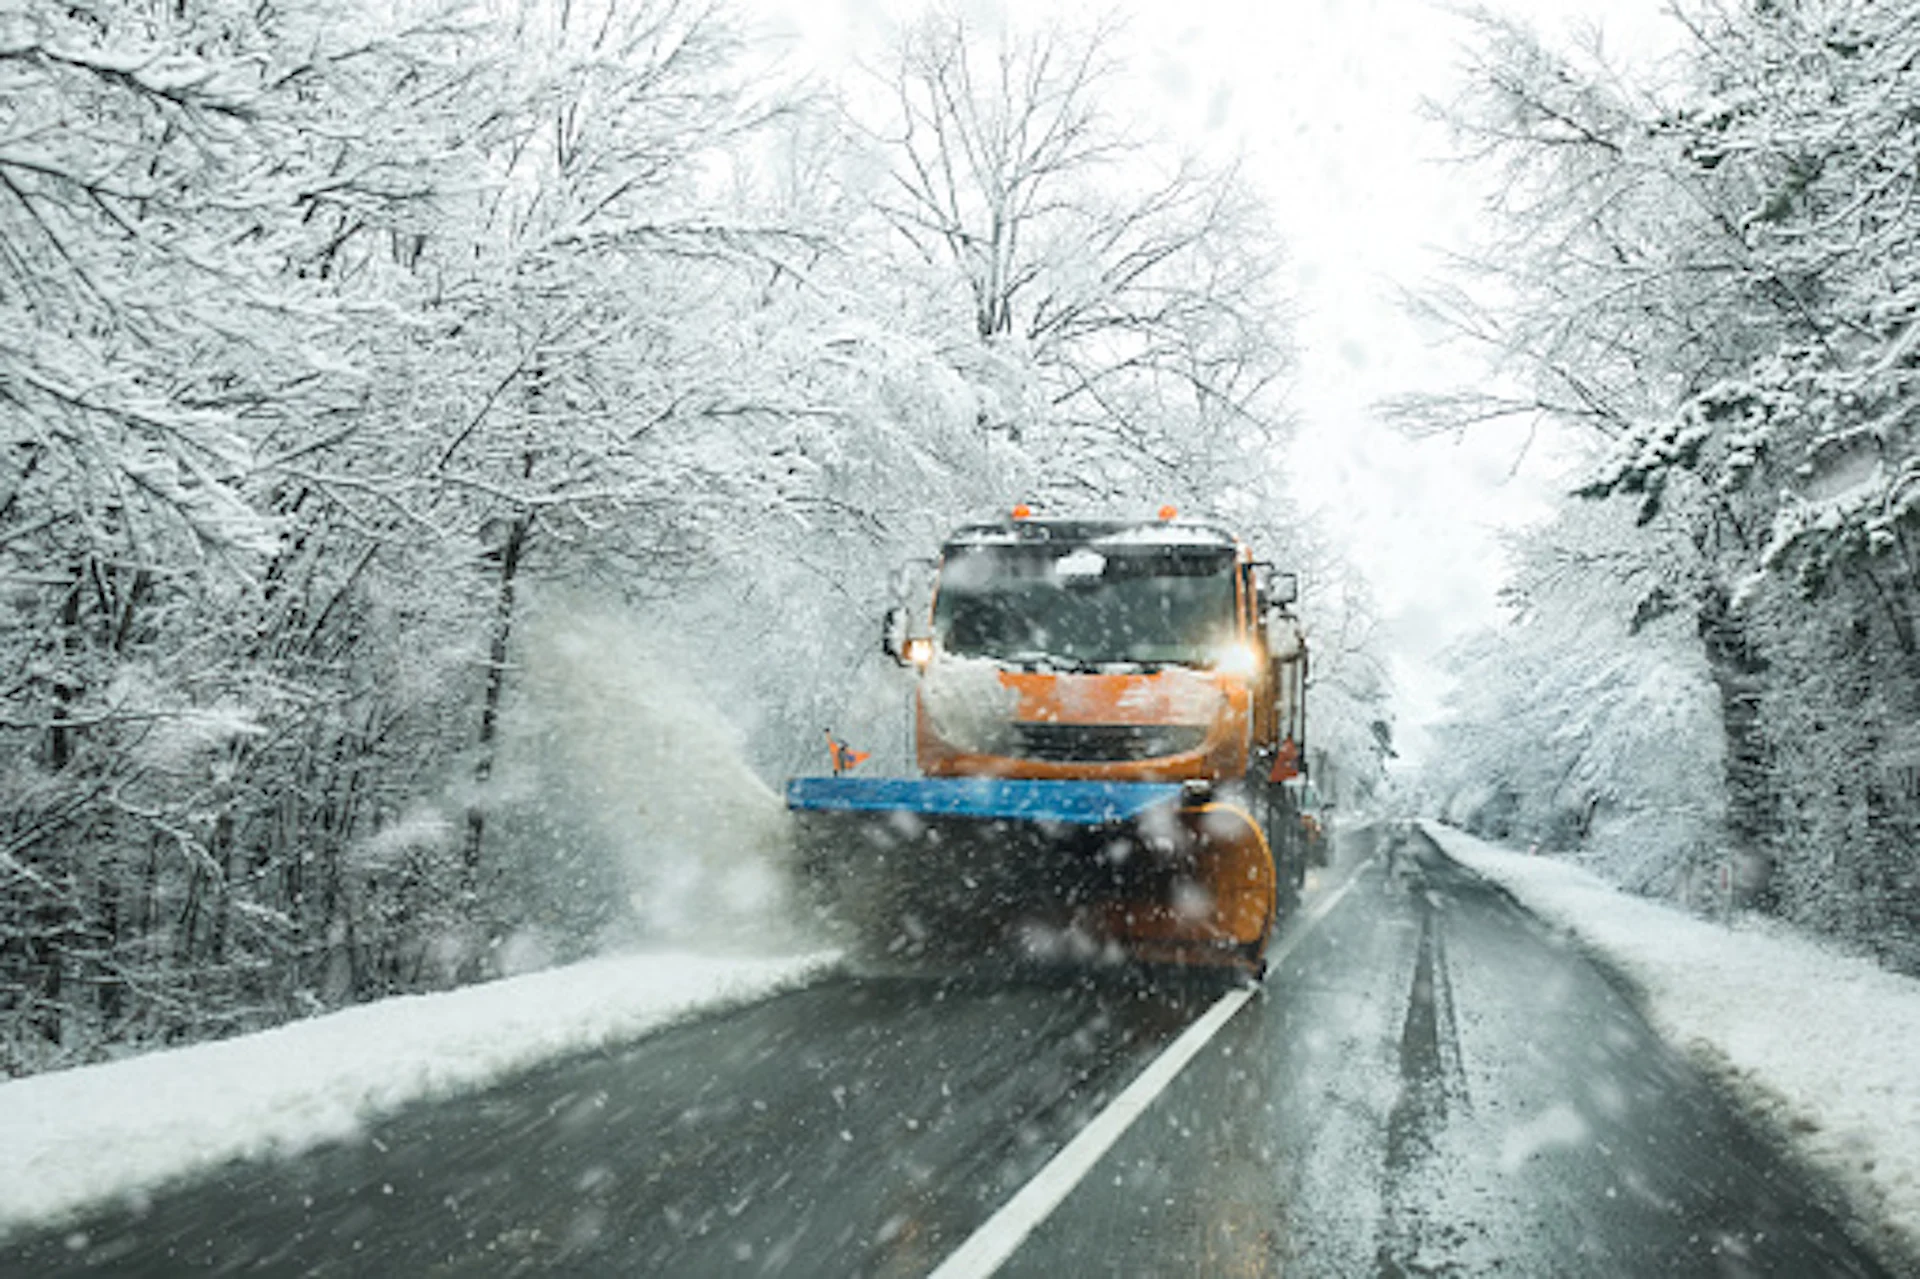 Winter road salting has year-round consequences